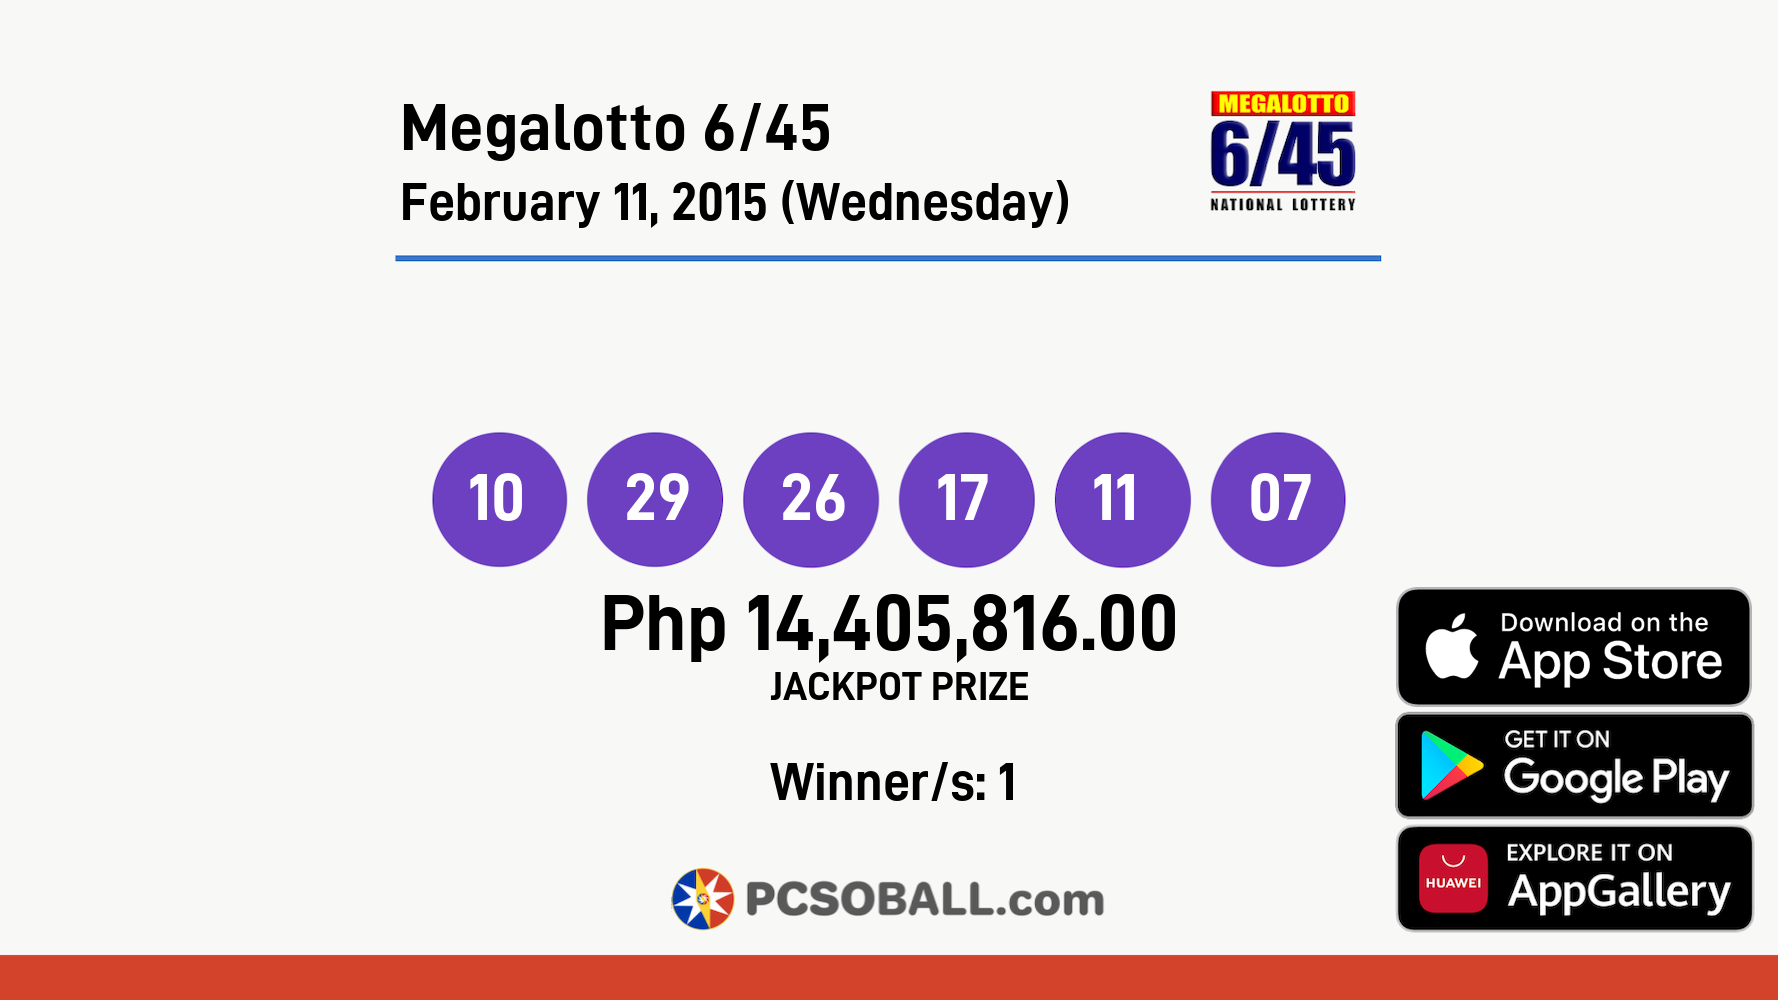 Megalotto 6/45 February 11, 2015 (Wednesday) Result